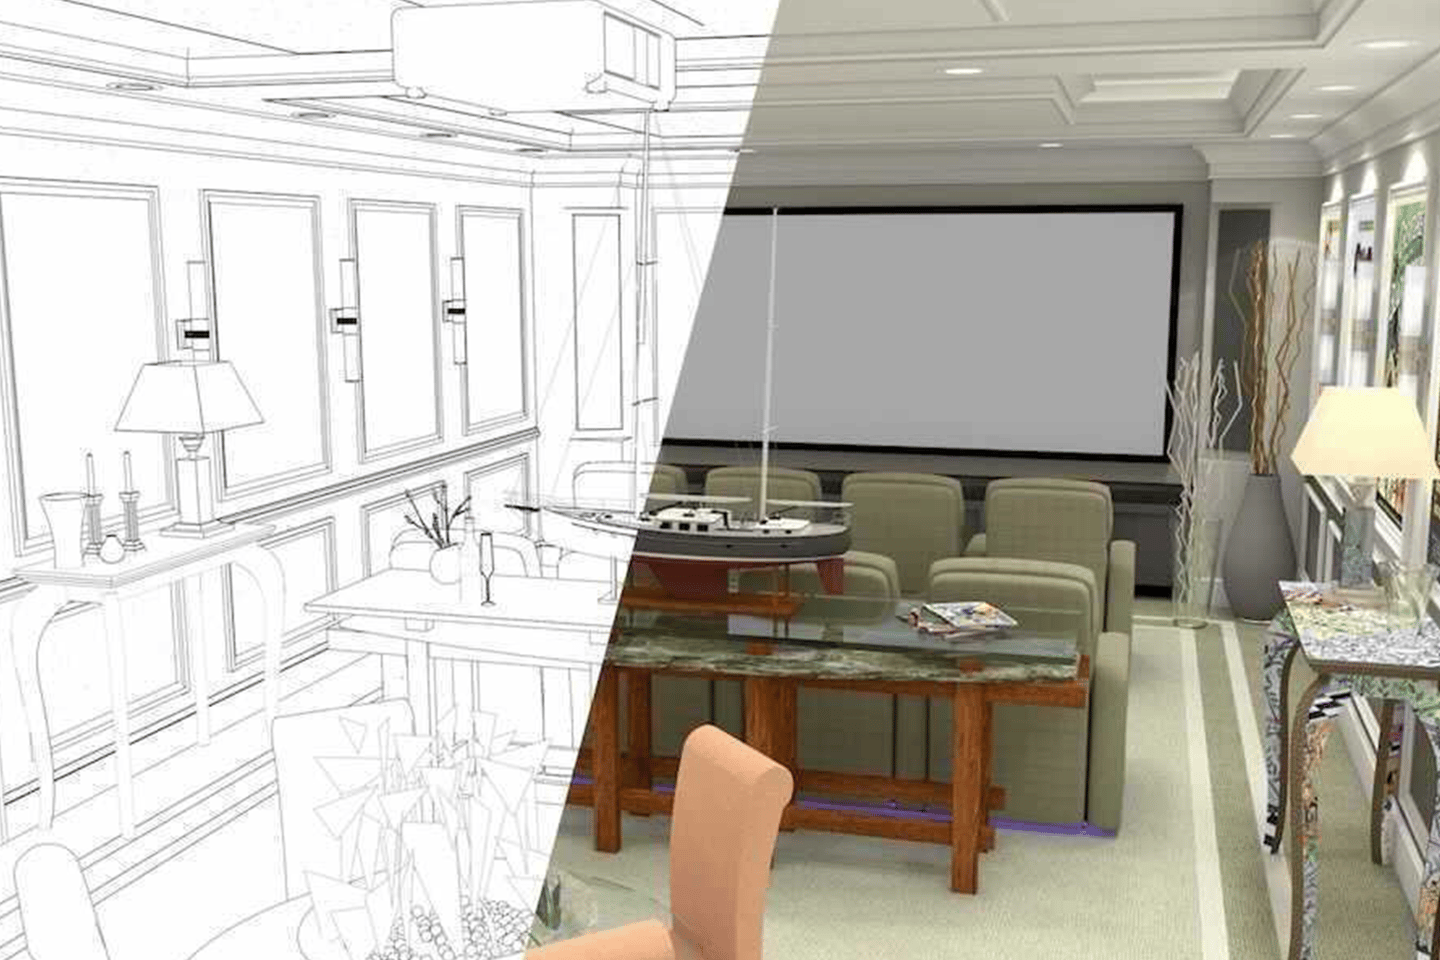 5427-2103-webinar-bldg-may-residential-interior-drawings-home-theater-rise-cover-image-1680x1120